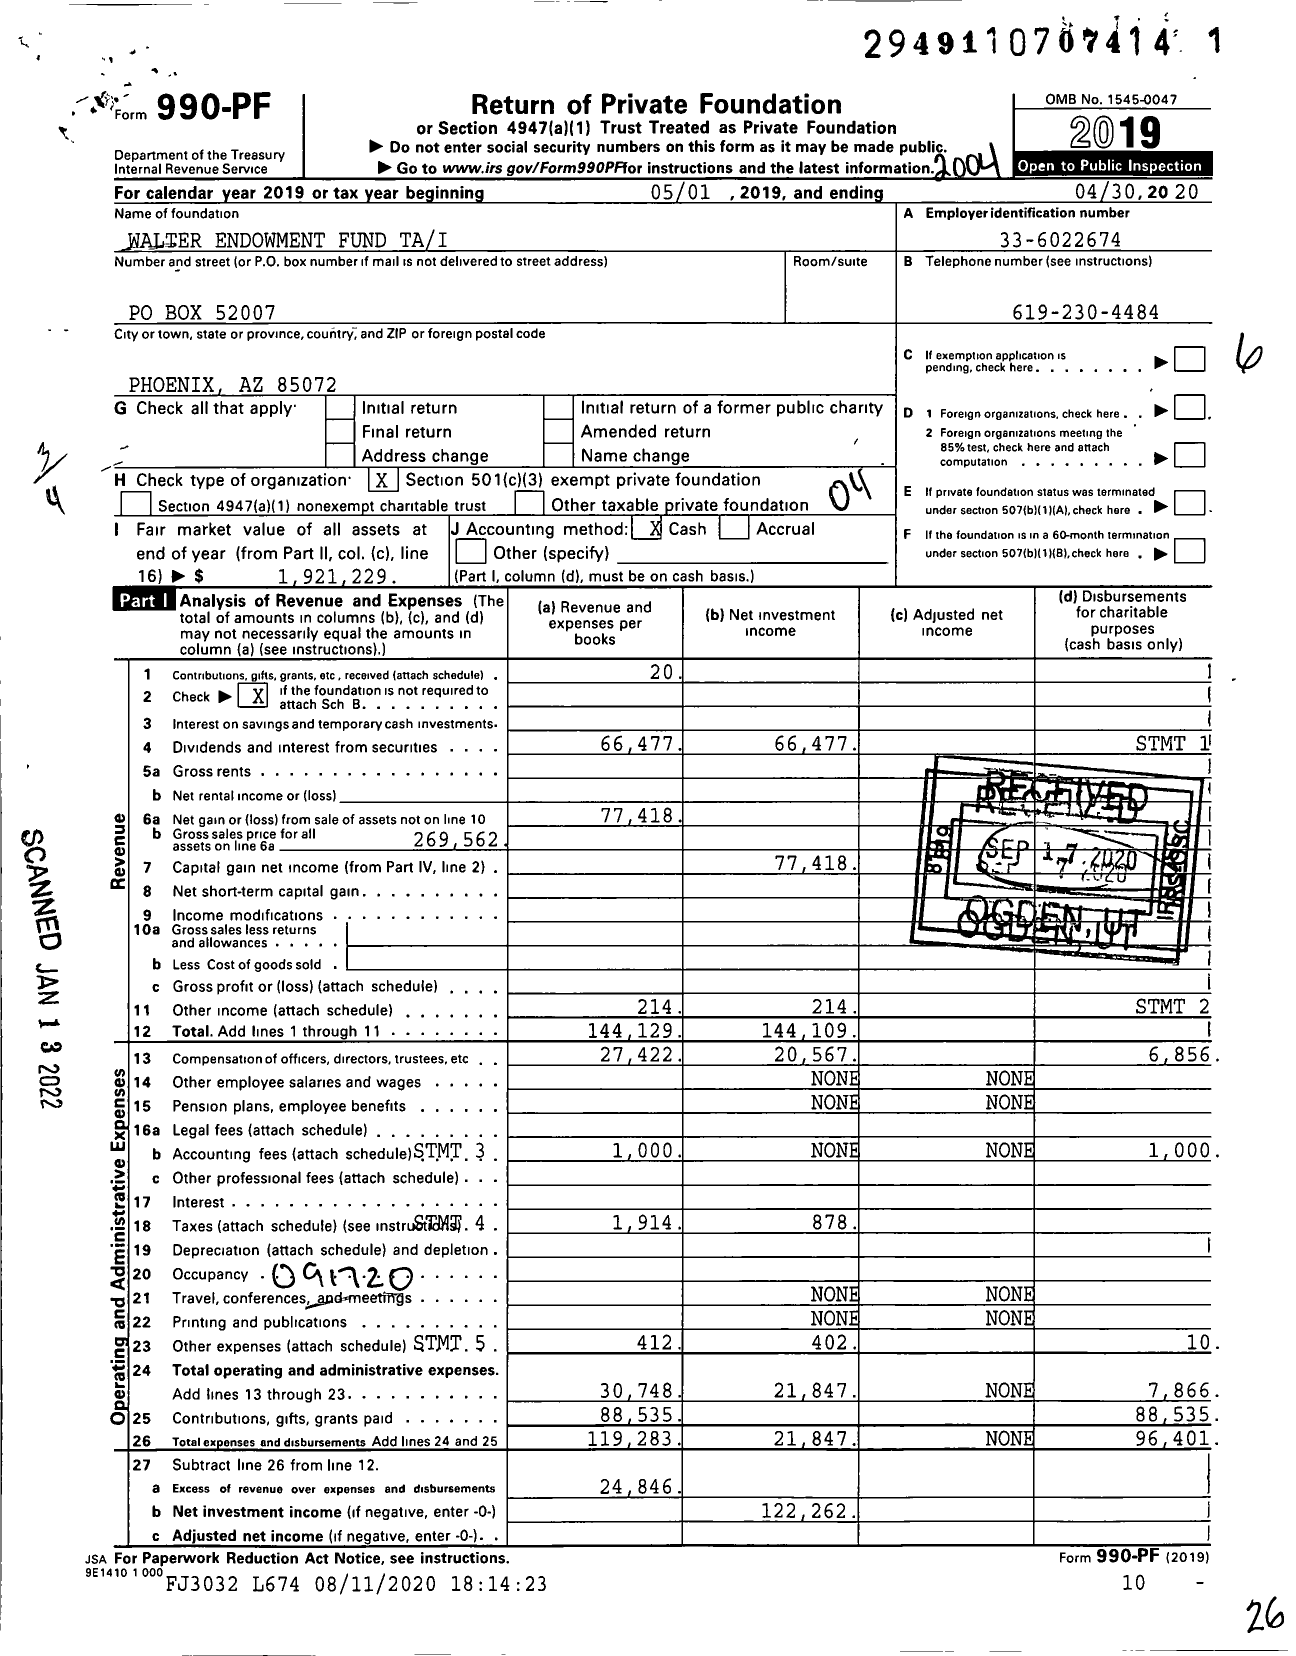 Image of first page of 2019 Form 990PF for Walter Endowment Fund Tai